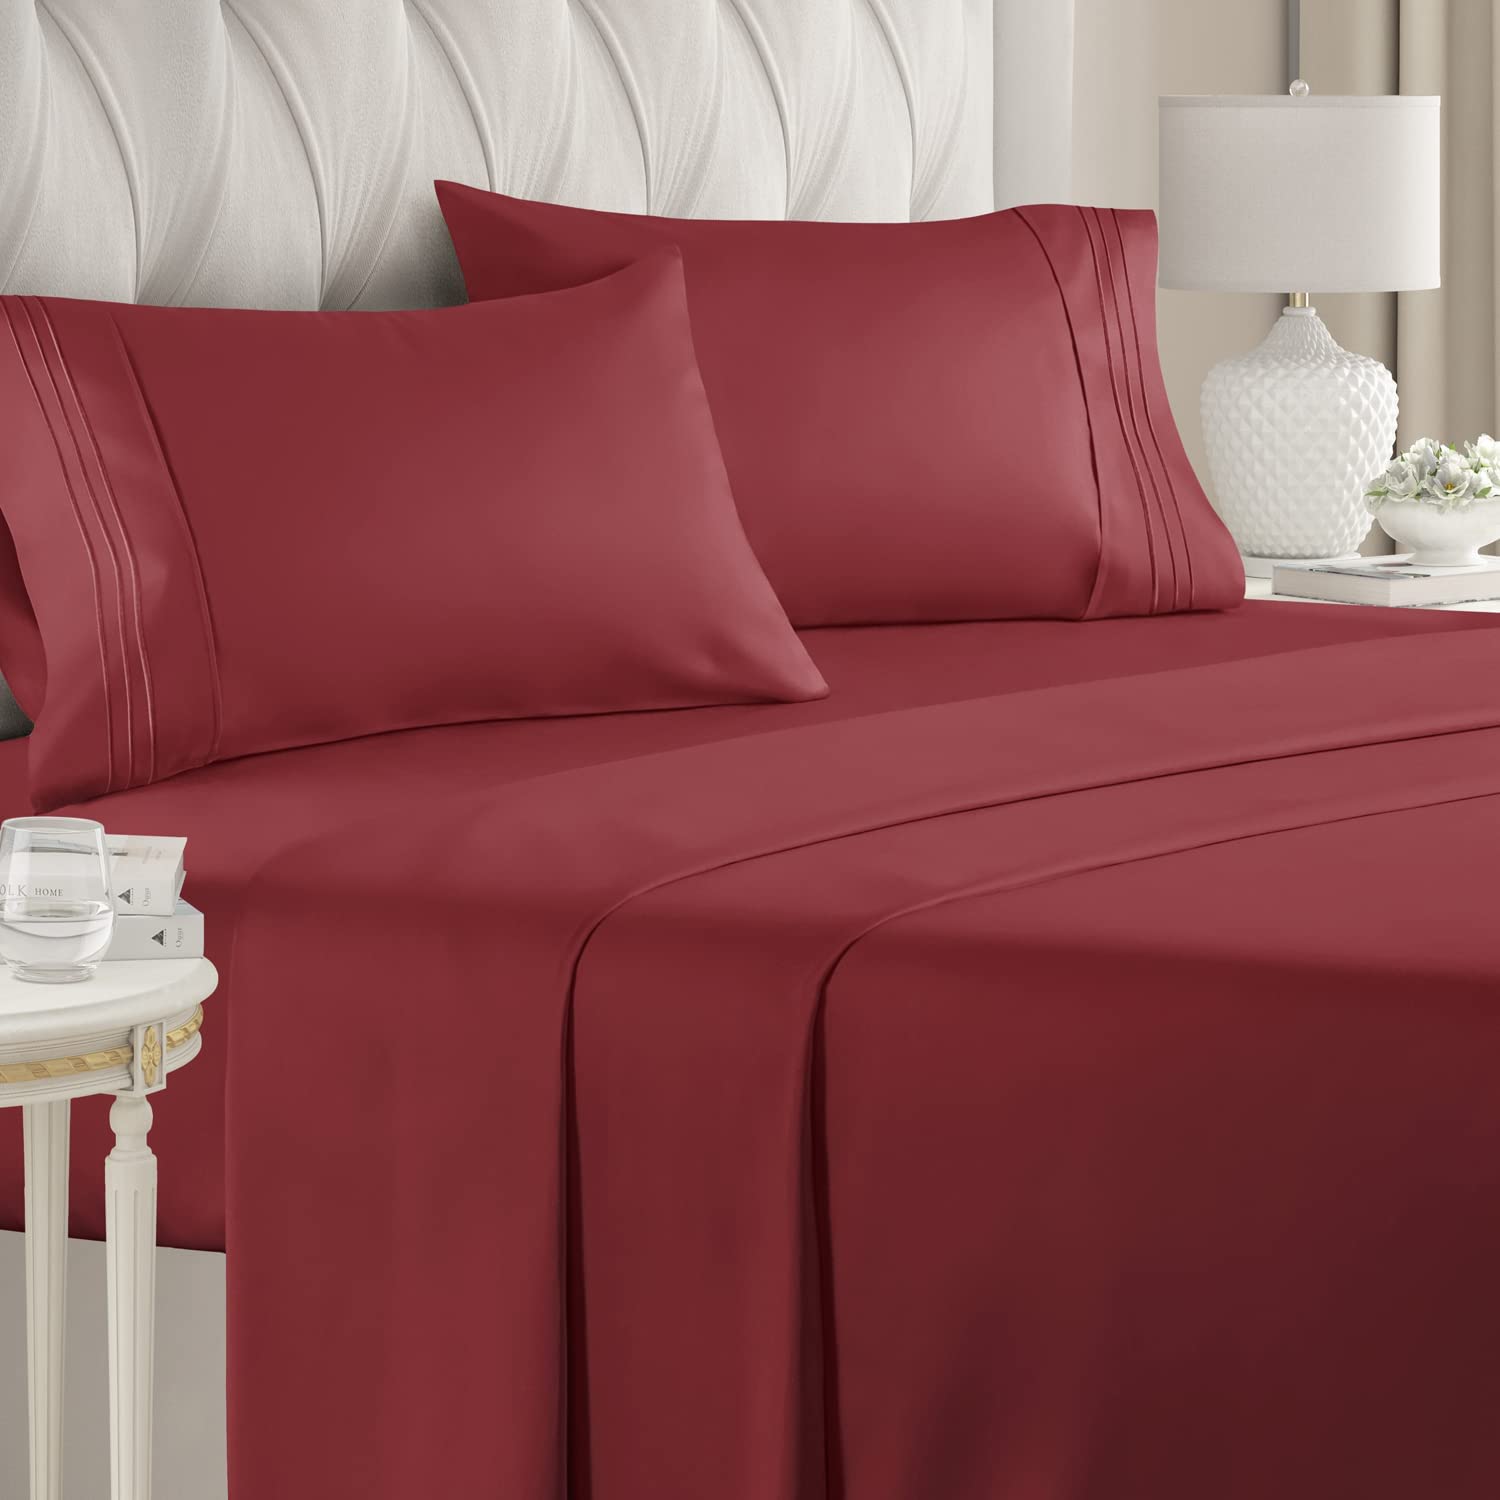 Buy 1500 Thread Count Sheet Set Egyptian Cotton Solid Burgundy at- Egyptianhomelinens.com
